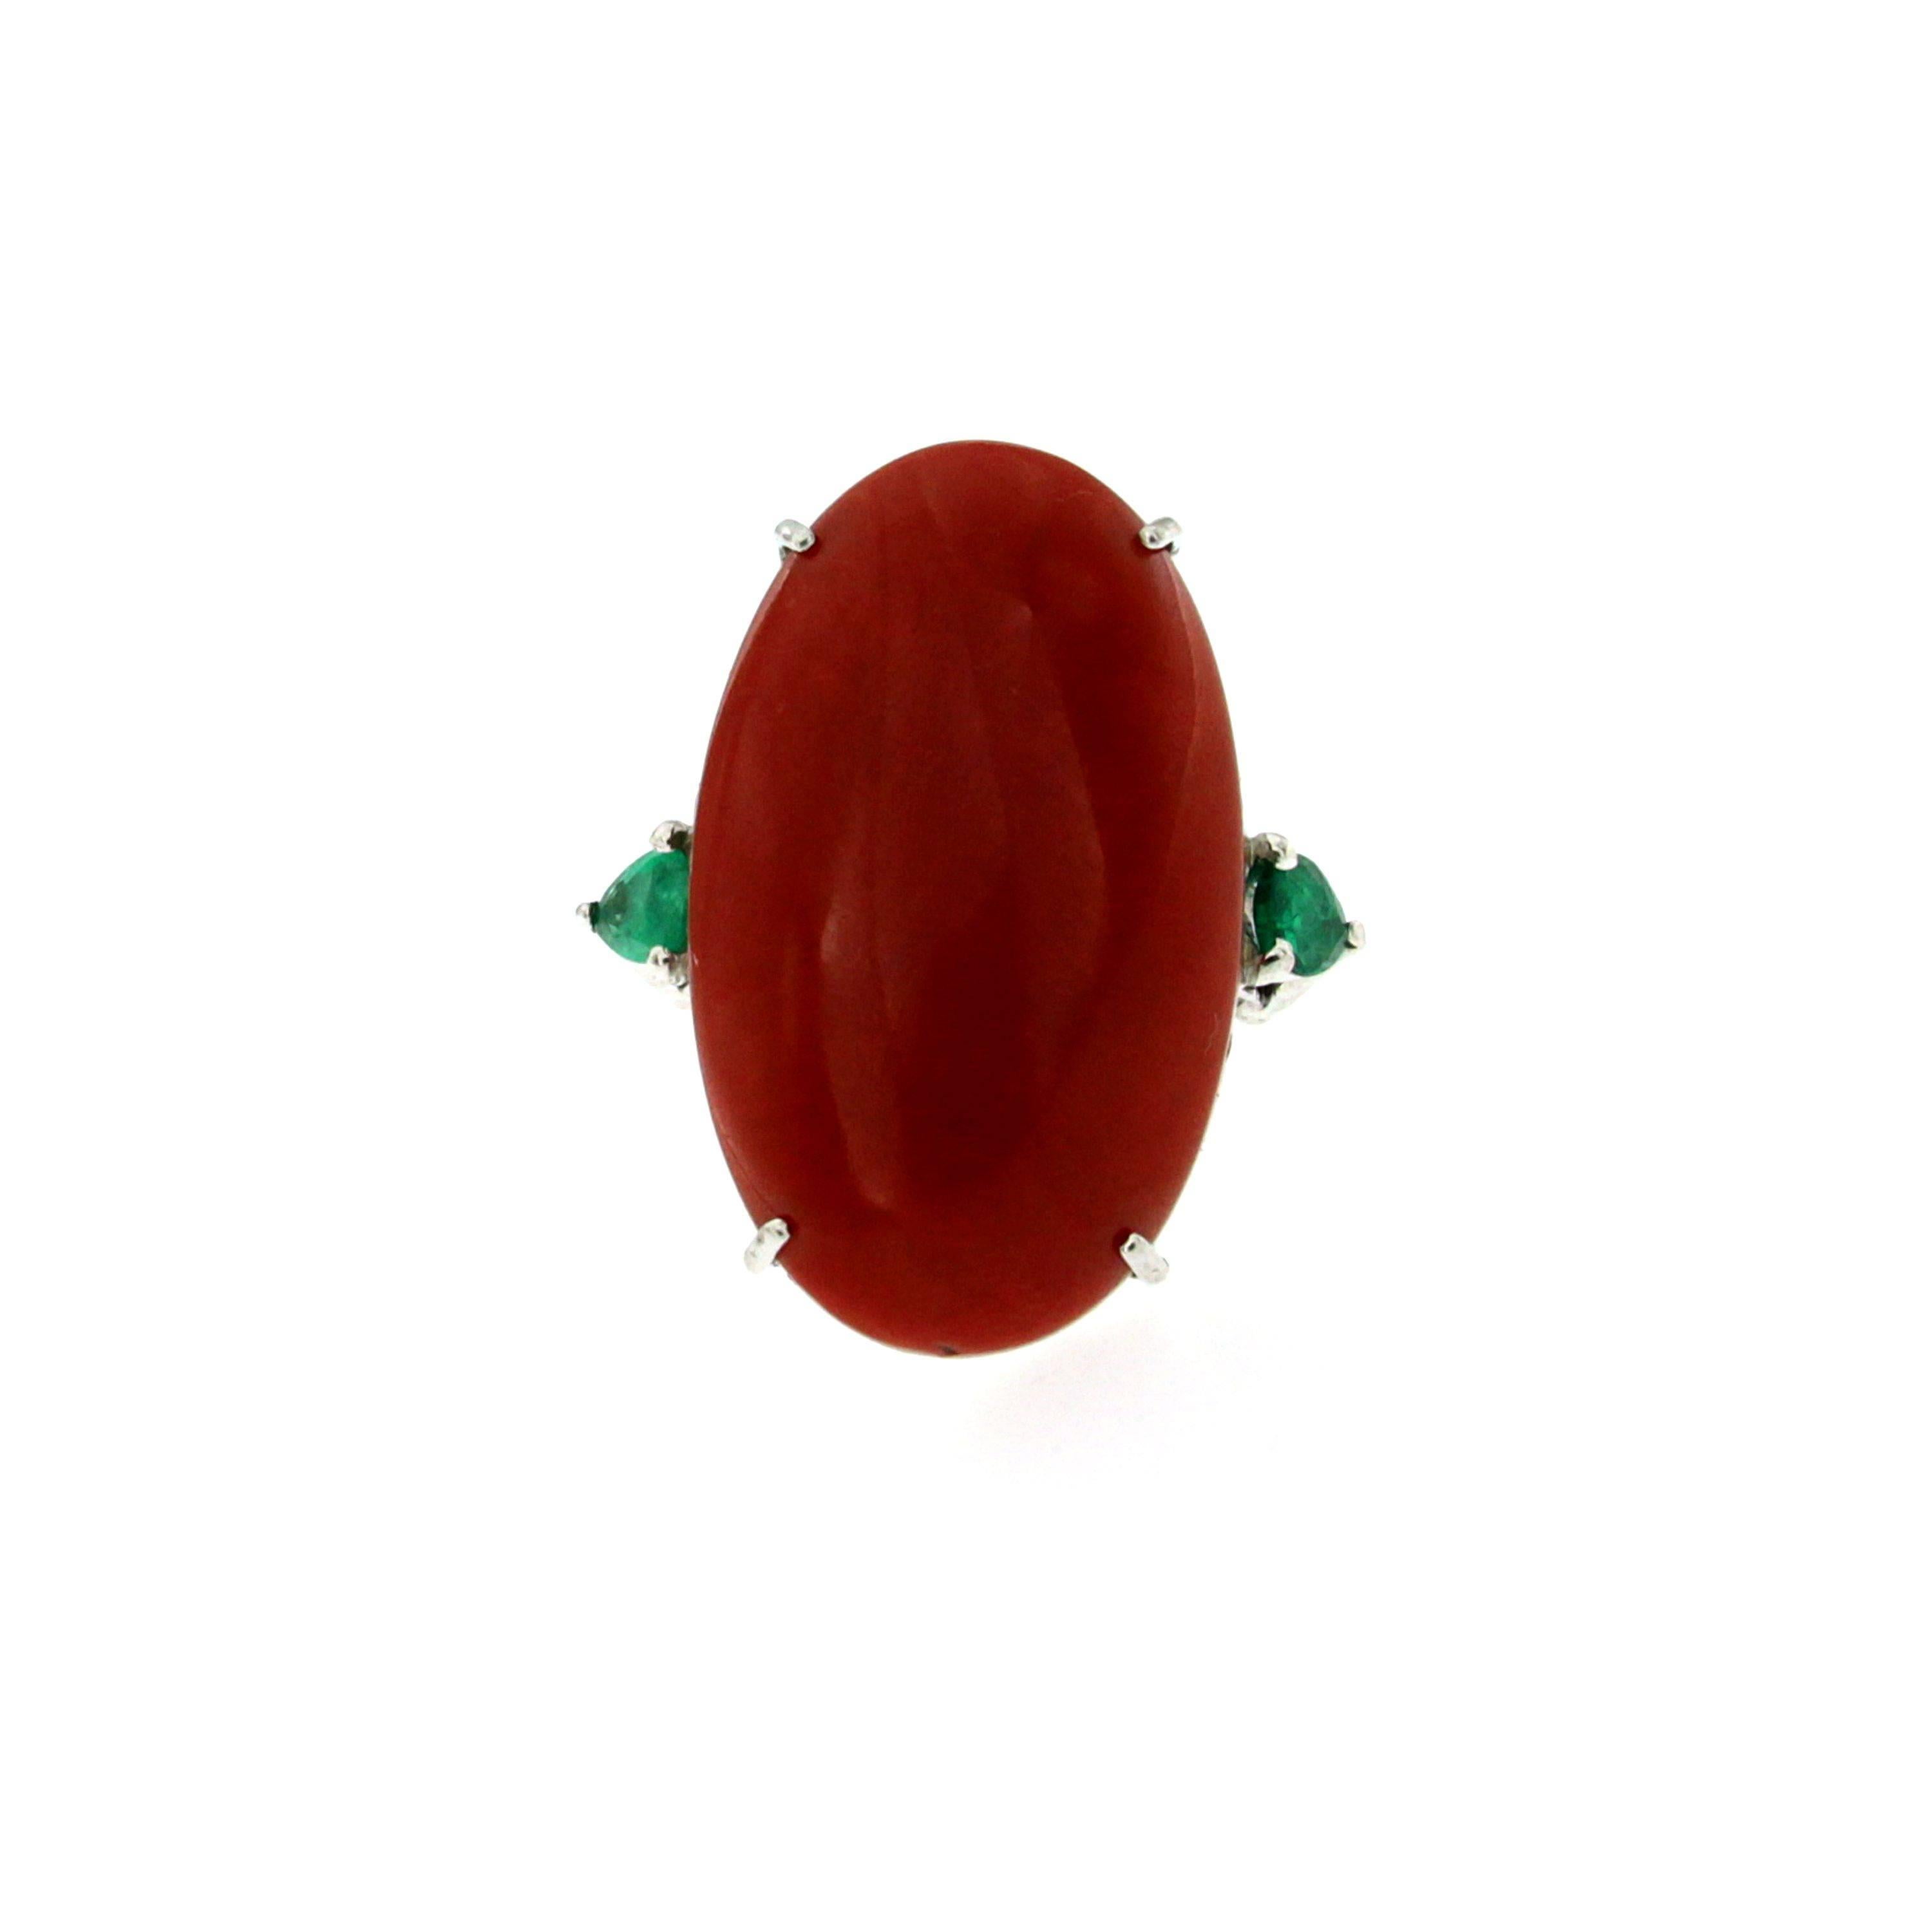 Beautiful vintage ring out from 1970s origin Italy, hand crafted of solid 18Kt white gold. 

The ring features a Natural Oval Cabochon Aka Japanese Coral, intense red color without imperfections, not dyed or worked with any resin or other synthetic